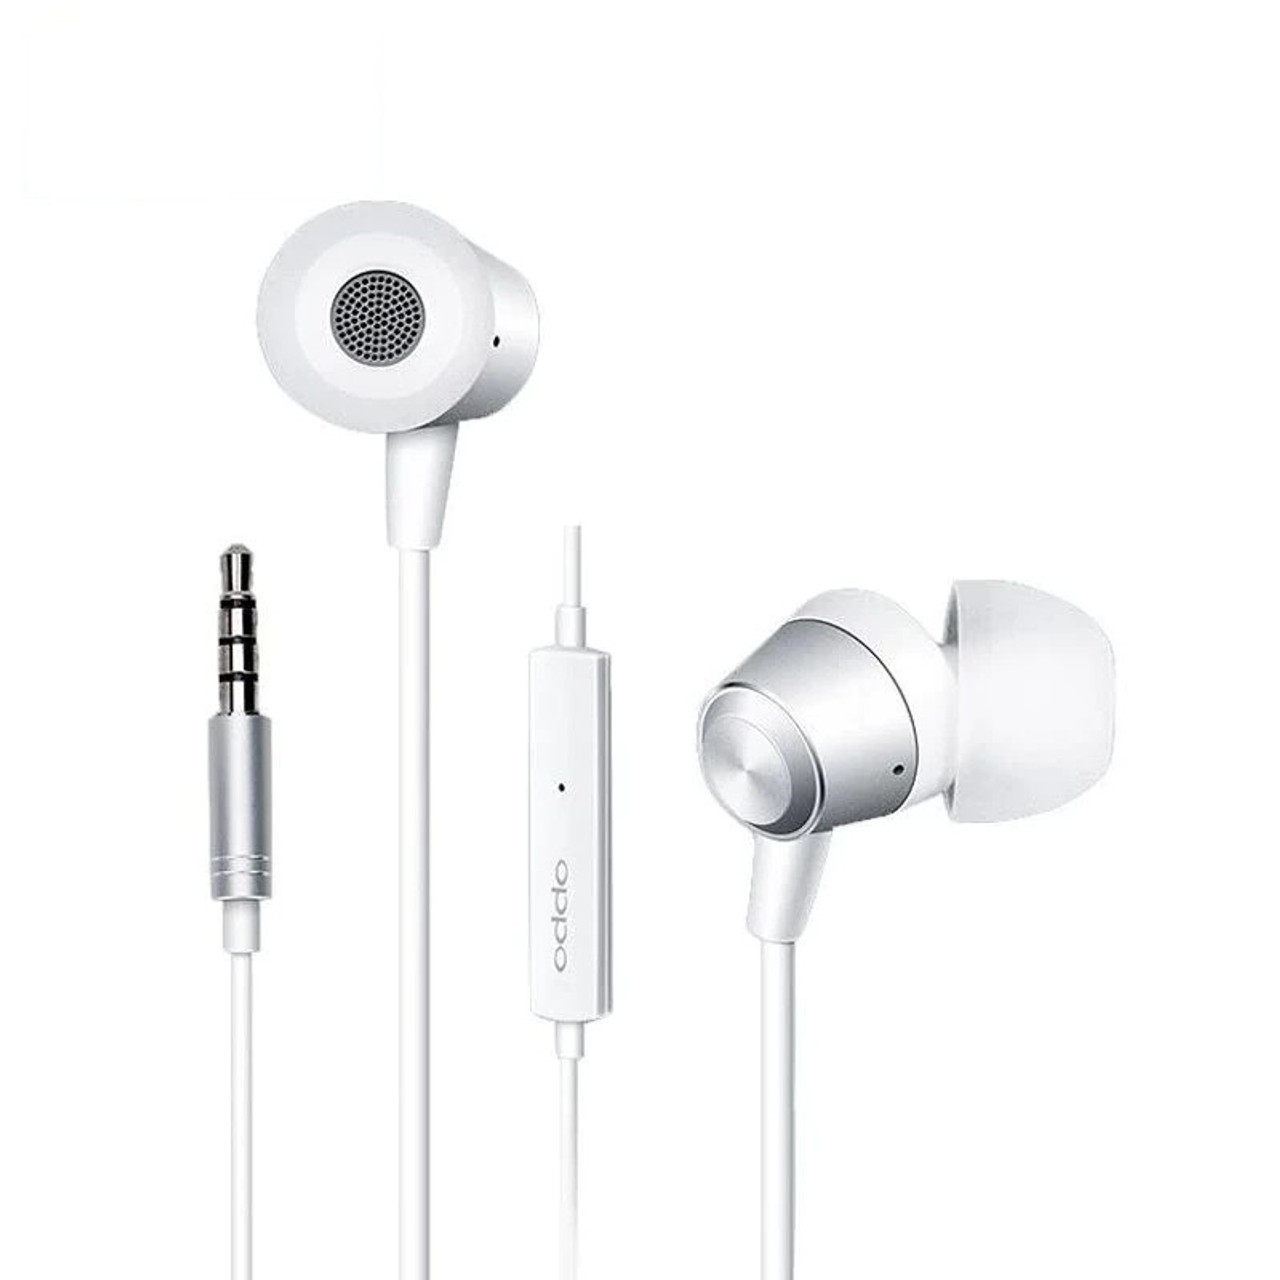 Premium 3.5mm Earphone (MH130) Stereo Audio With Microphone and Control Button For Mobile Phone Tablet MP3 MP4 Player iPhone iPod iPad Computer Bulk